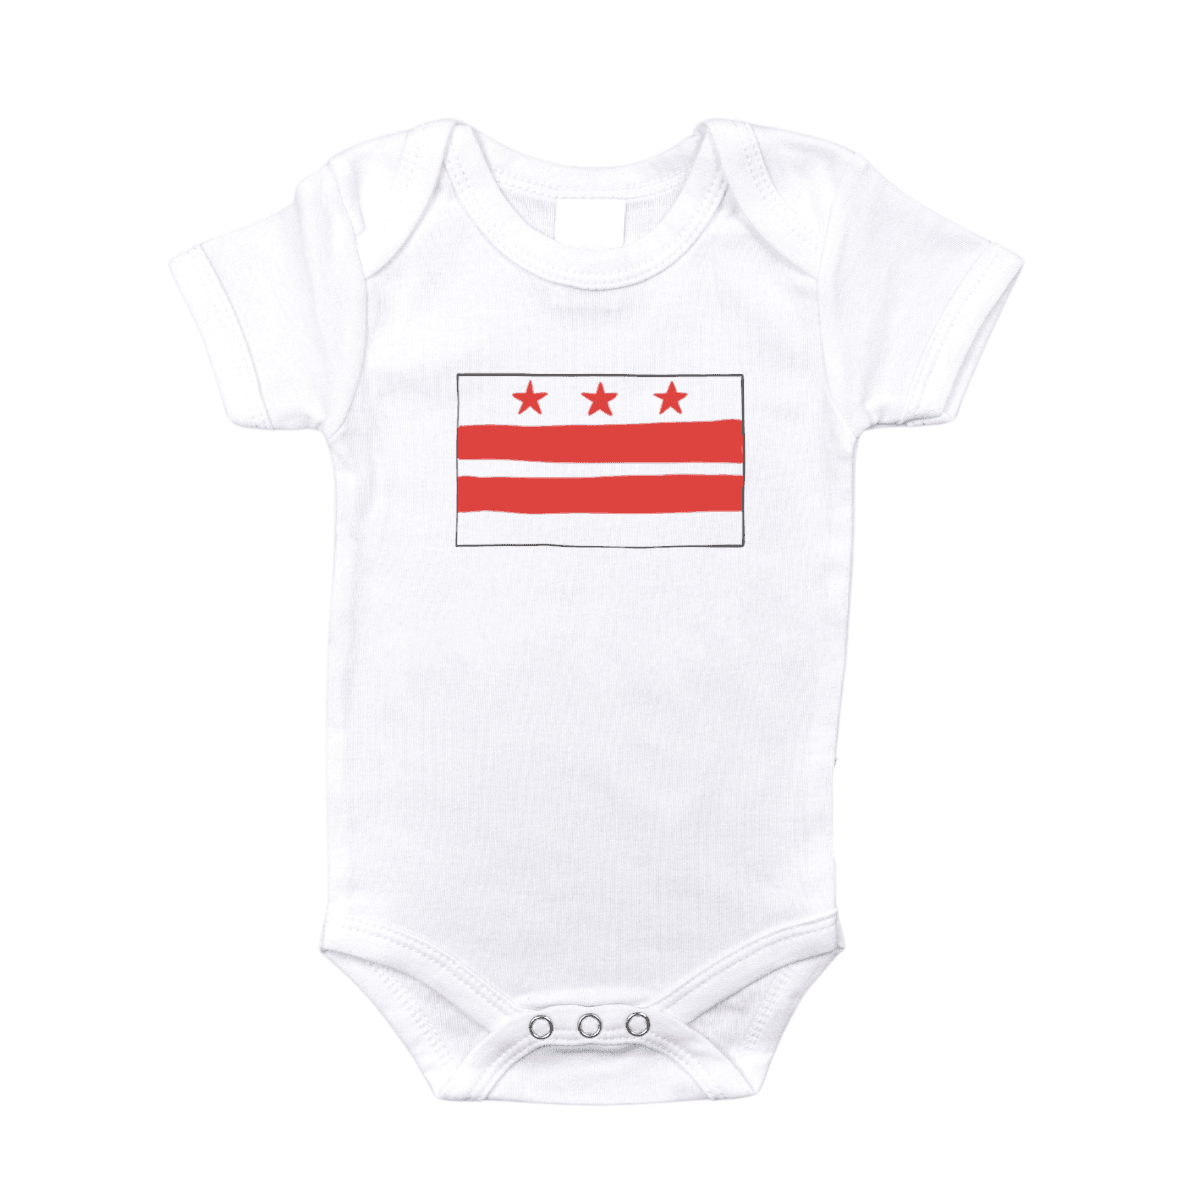 White baby onesie with Washington D.C. flag design, featuring three red stars above two red stripes.